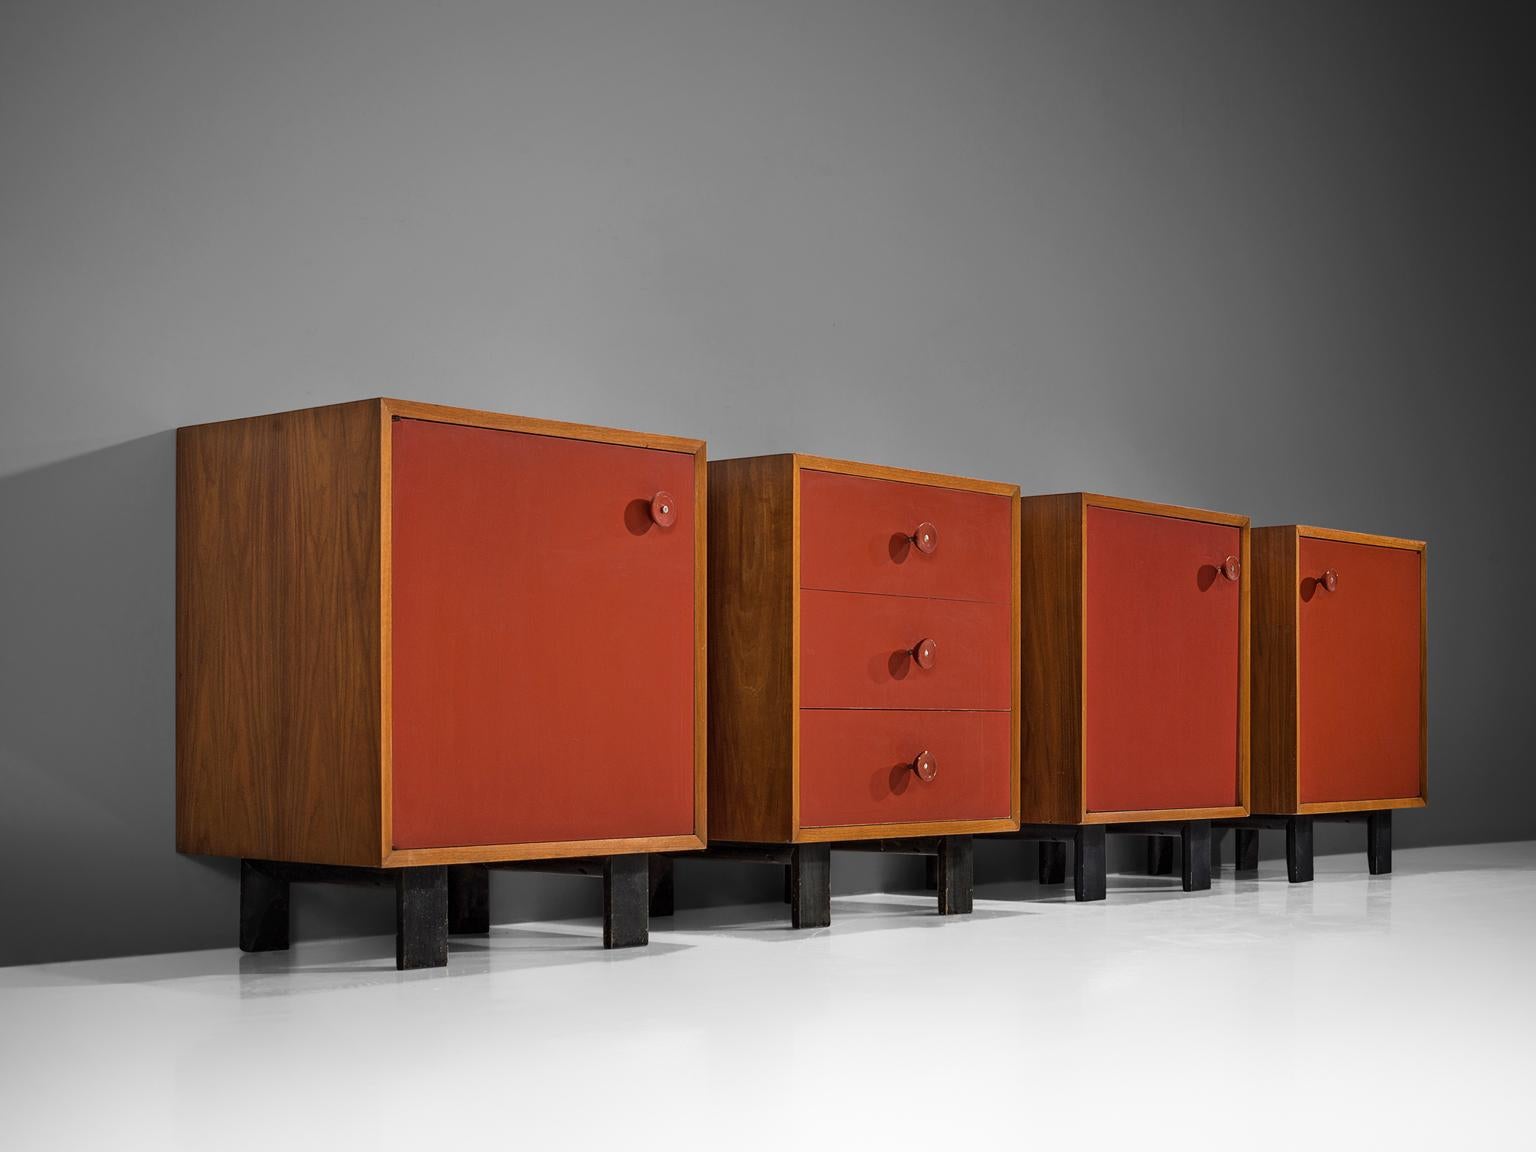 George Nelson for Herman Miller Zeeland Michigan, set of four cabinets in teak and patinated black wood, United States, 1950s. 

This four set of cabinets present patinated red color doors, which blend nicely with the light color of the teak. On the